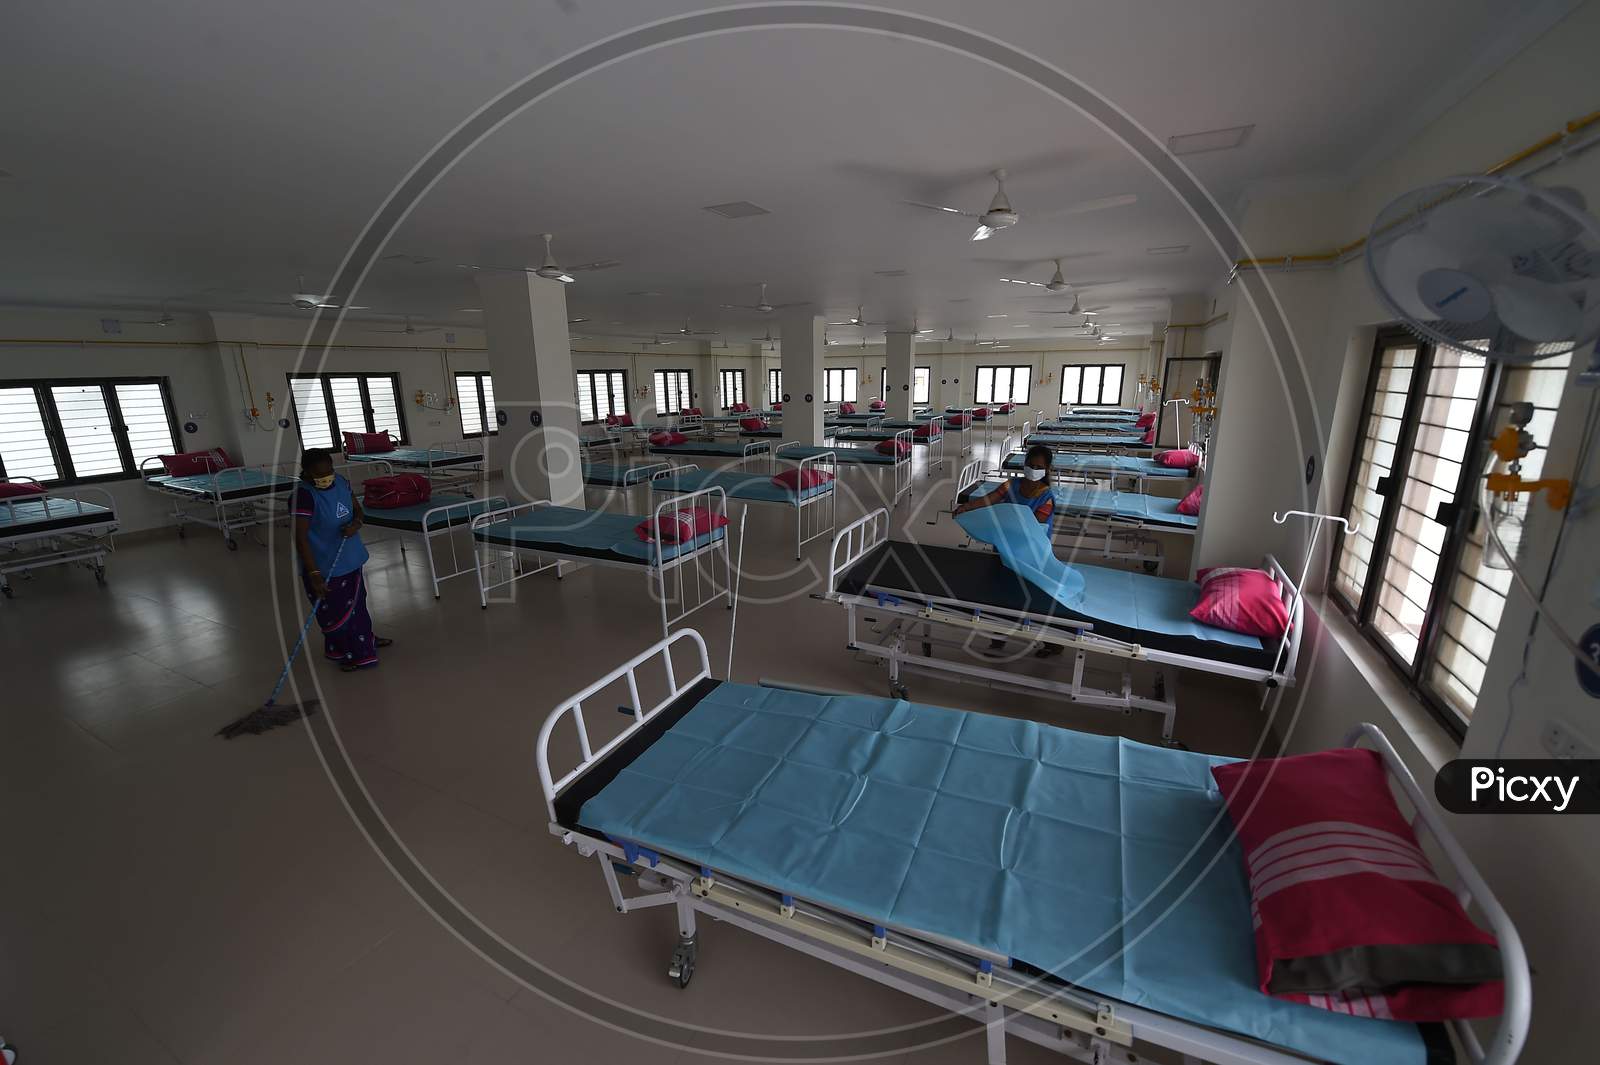 Health care workers arrange beds to convert a building which belonged to the National Institute of Ageing into a dedicated Covid-19 Care Centre in Chennai, Tamil Nadu on July 07, 2020